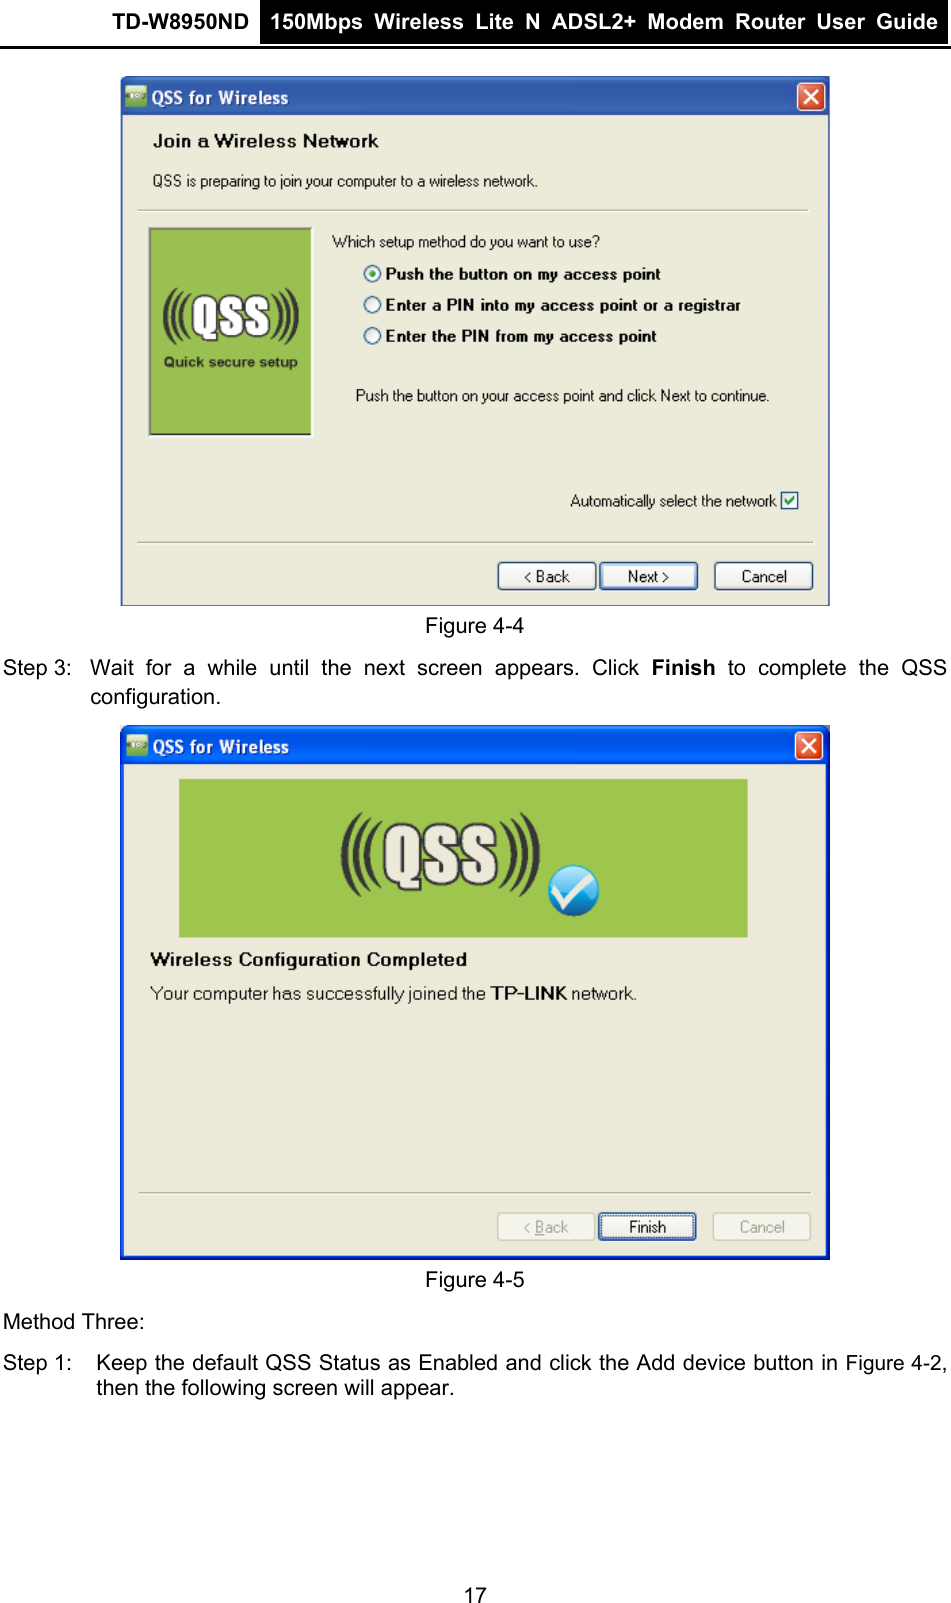 TD-W8950ND  150Mbps Wireless Lite N ADSL2+ Modem Router User Guide   Figure 4-4 Step 3:  Wait for a while until the next screen appears. Click Finish to complete the QSS configuration.  Figure 4-5 Method Three: Step 1:  Keep the default QSS Status as Enabled and click the Add device button in Figure 4-2, then the following screen will appear.   17 